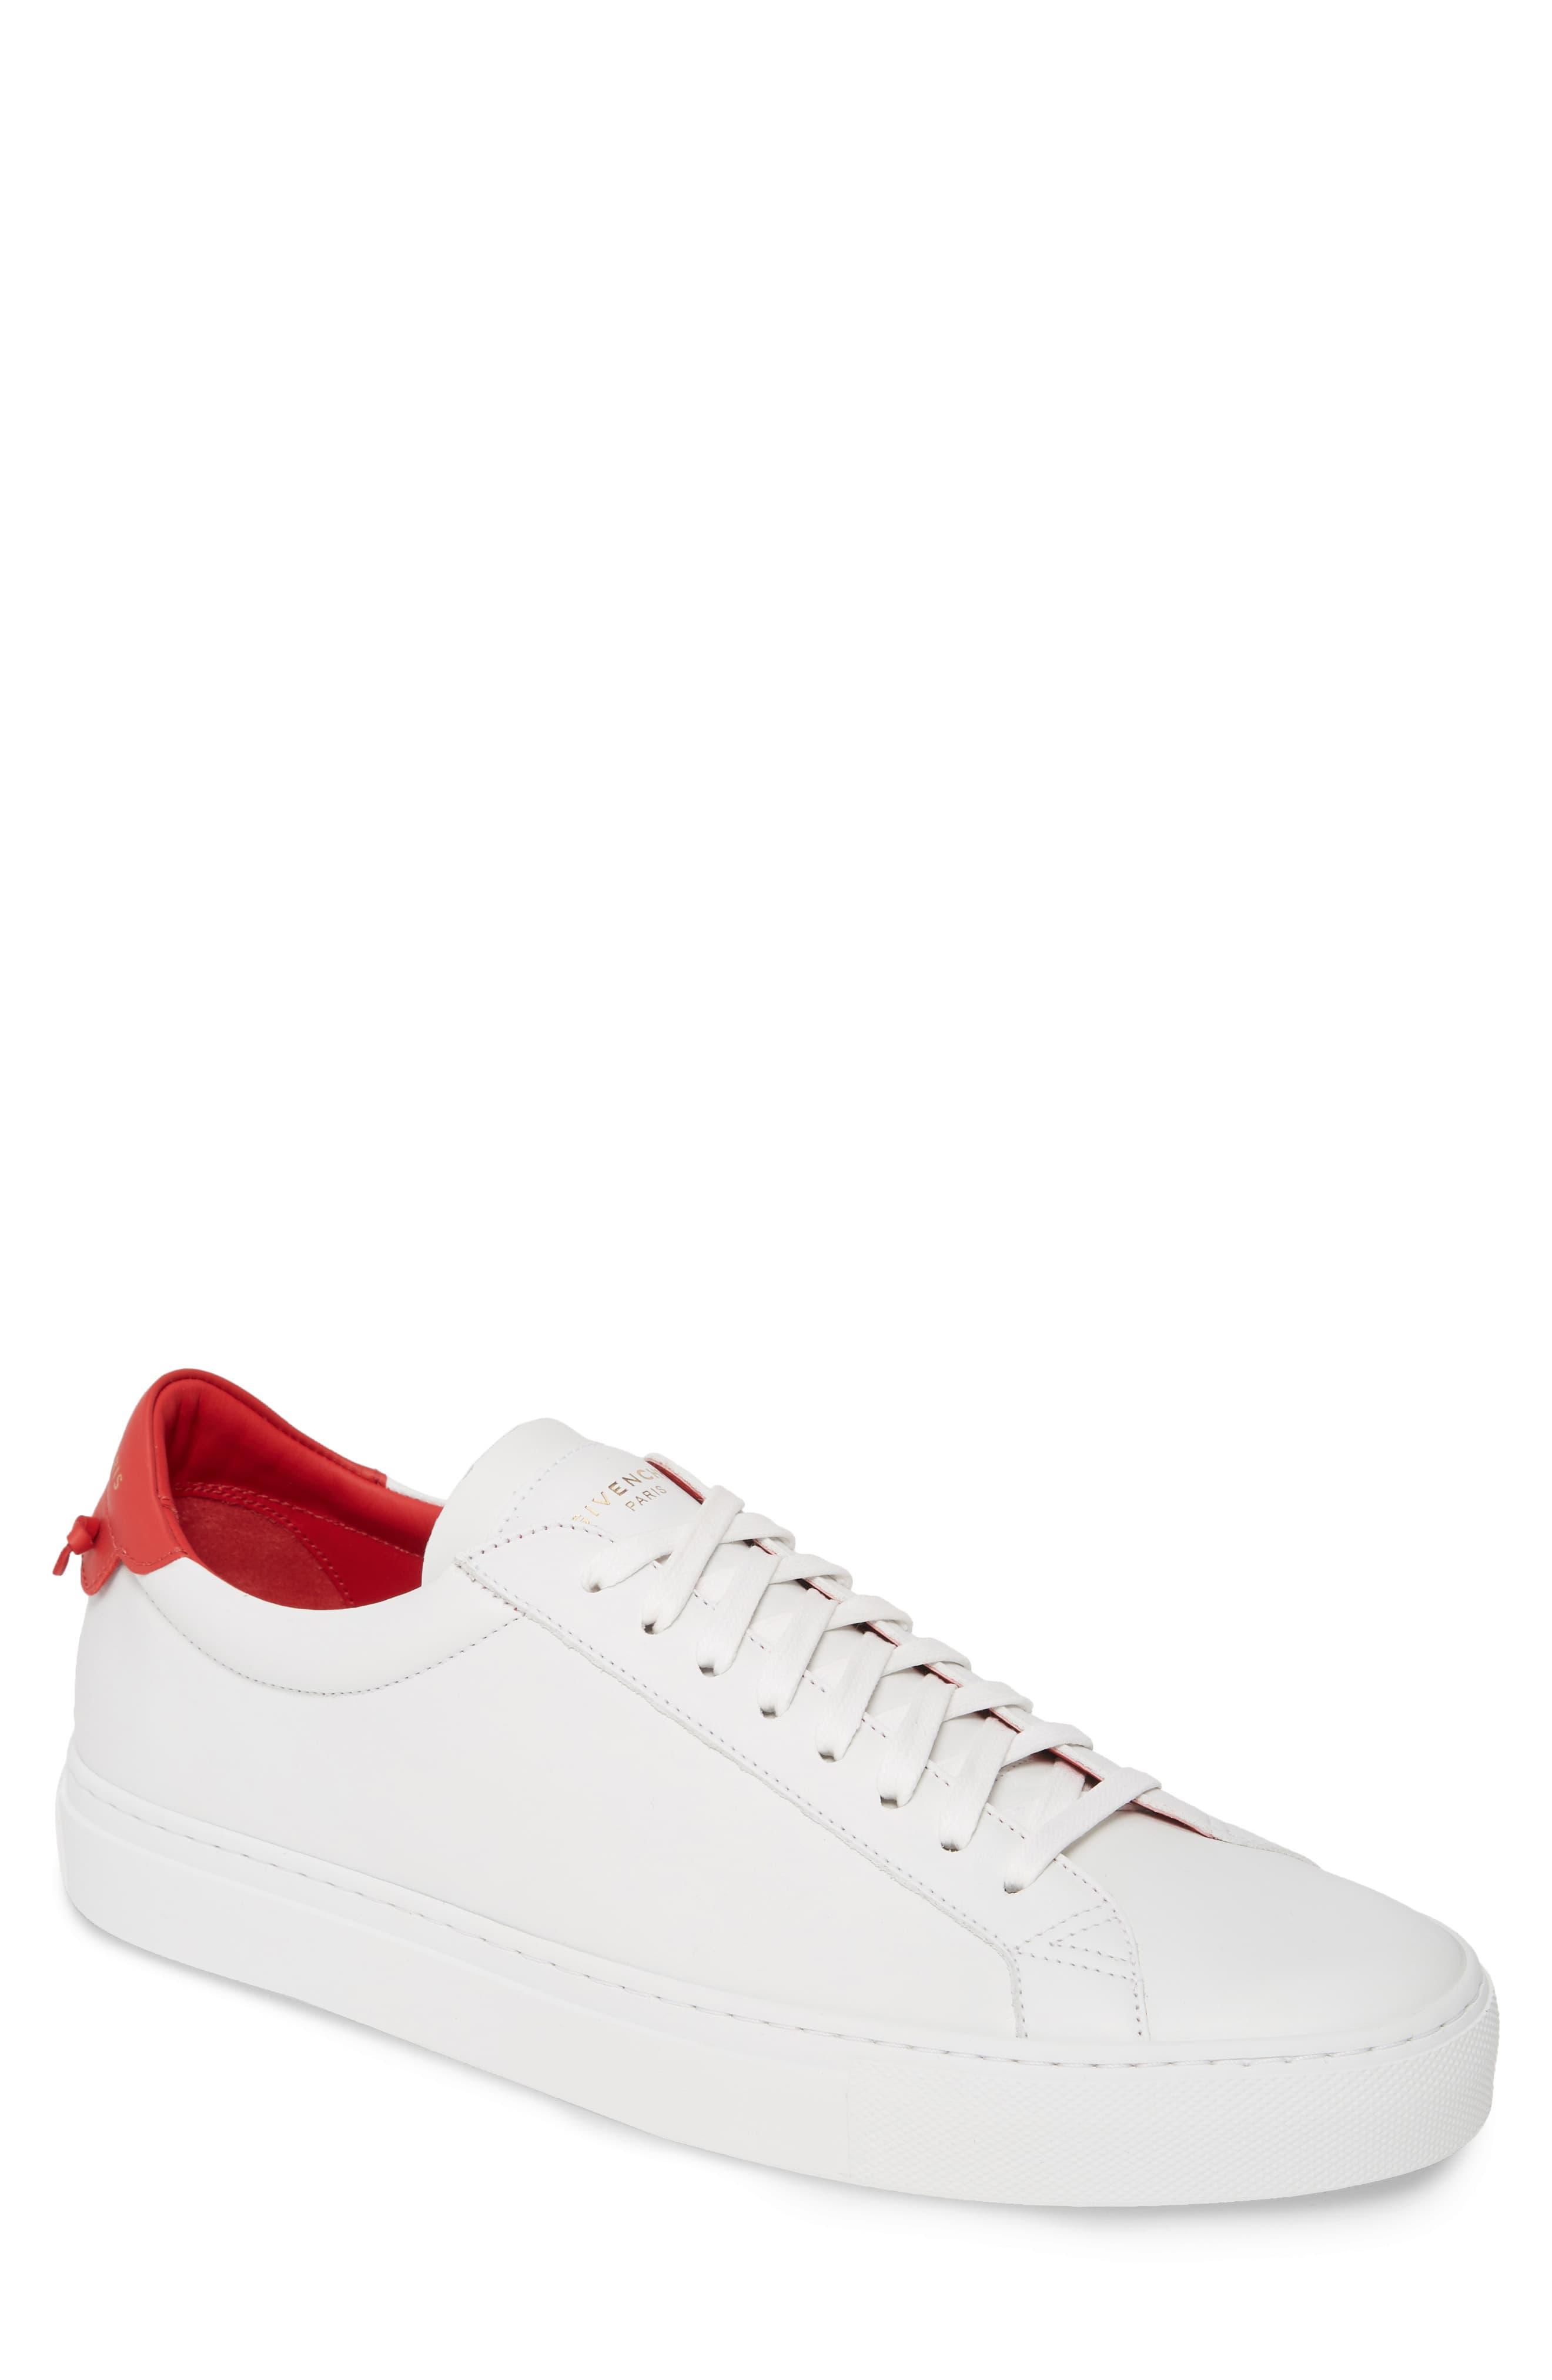 Givenchy Urban Knots Low Sneaker in White for Men - Lyst